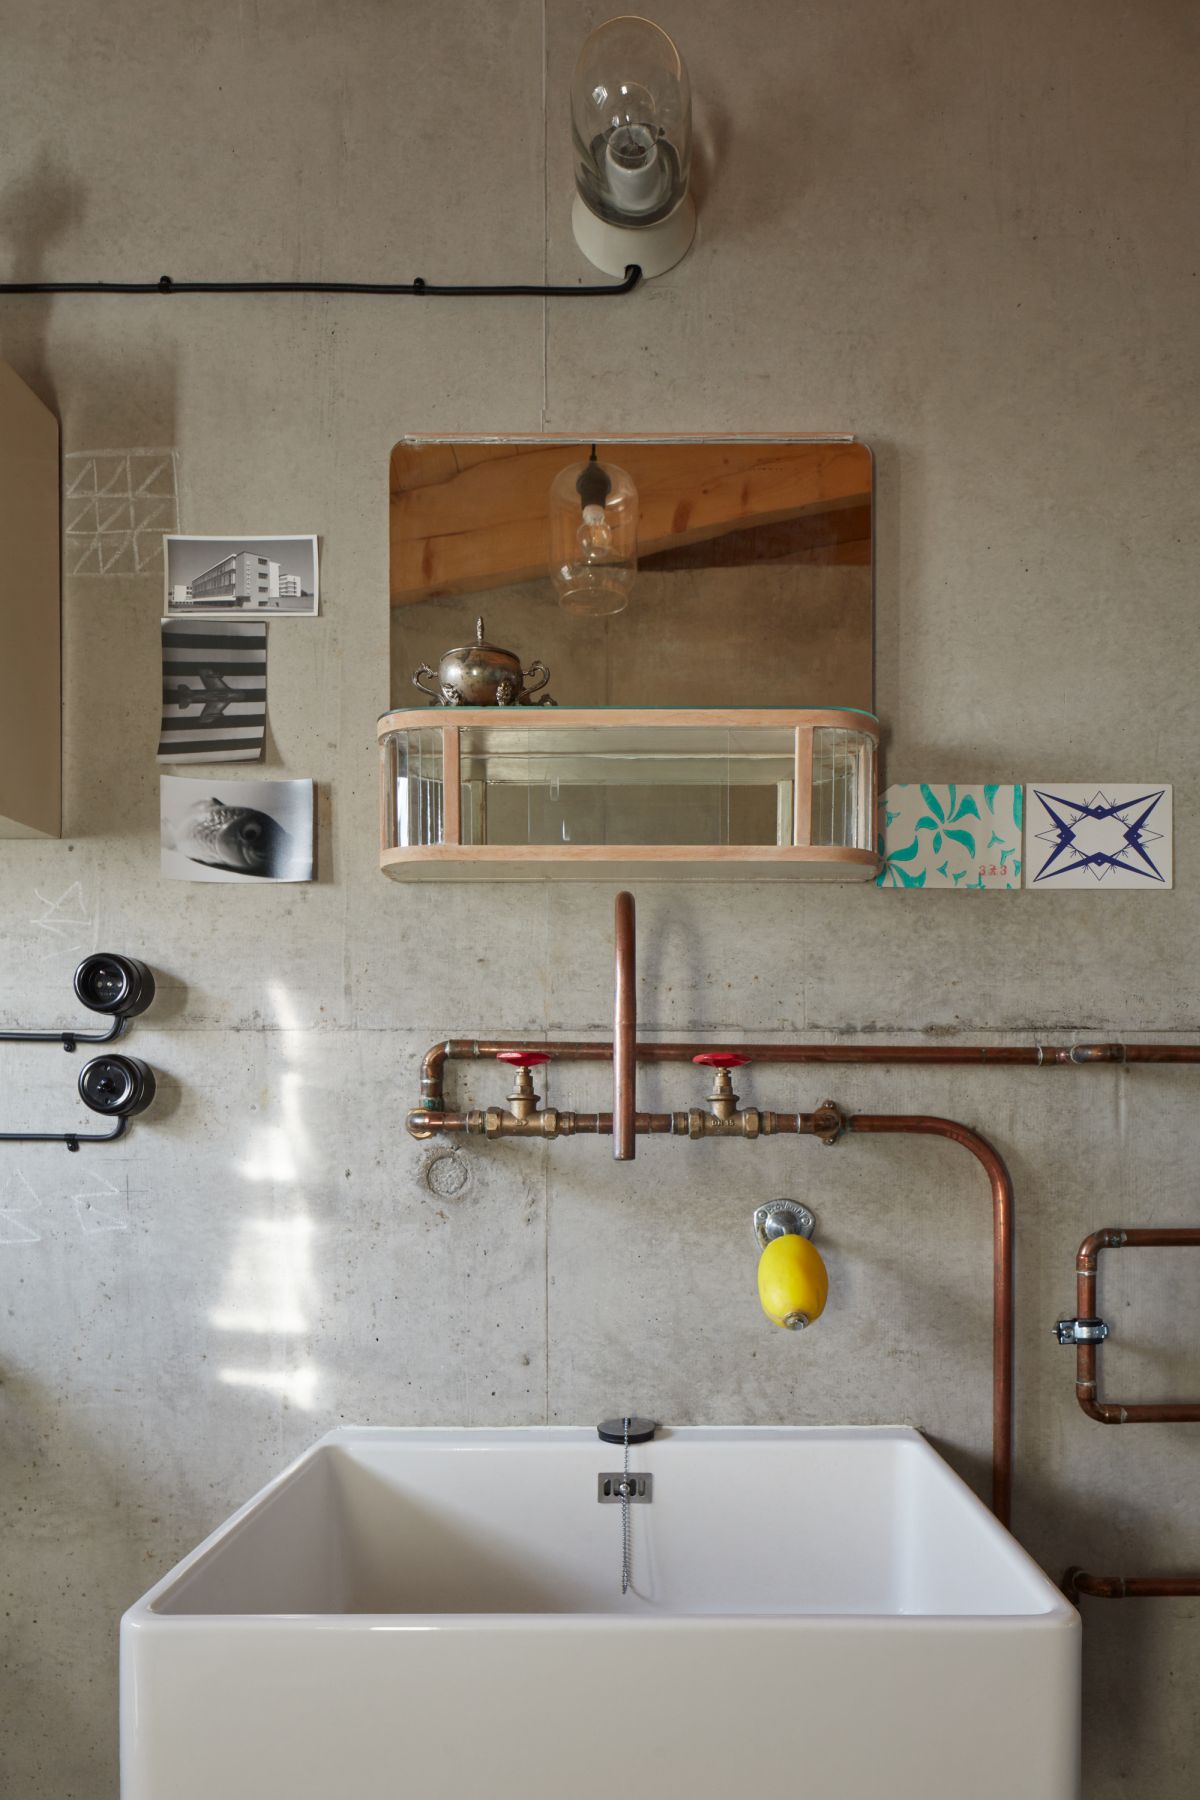 The en-suite bathroom has bare walls and exposed pipes which double as decorative elements